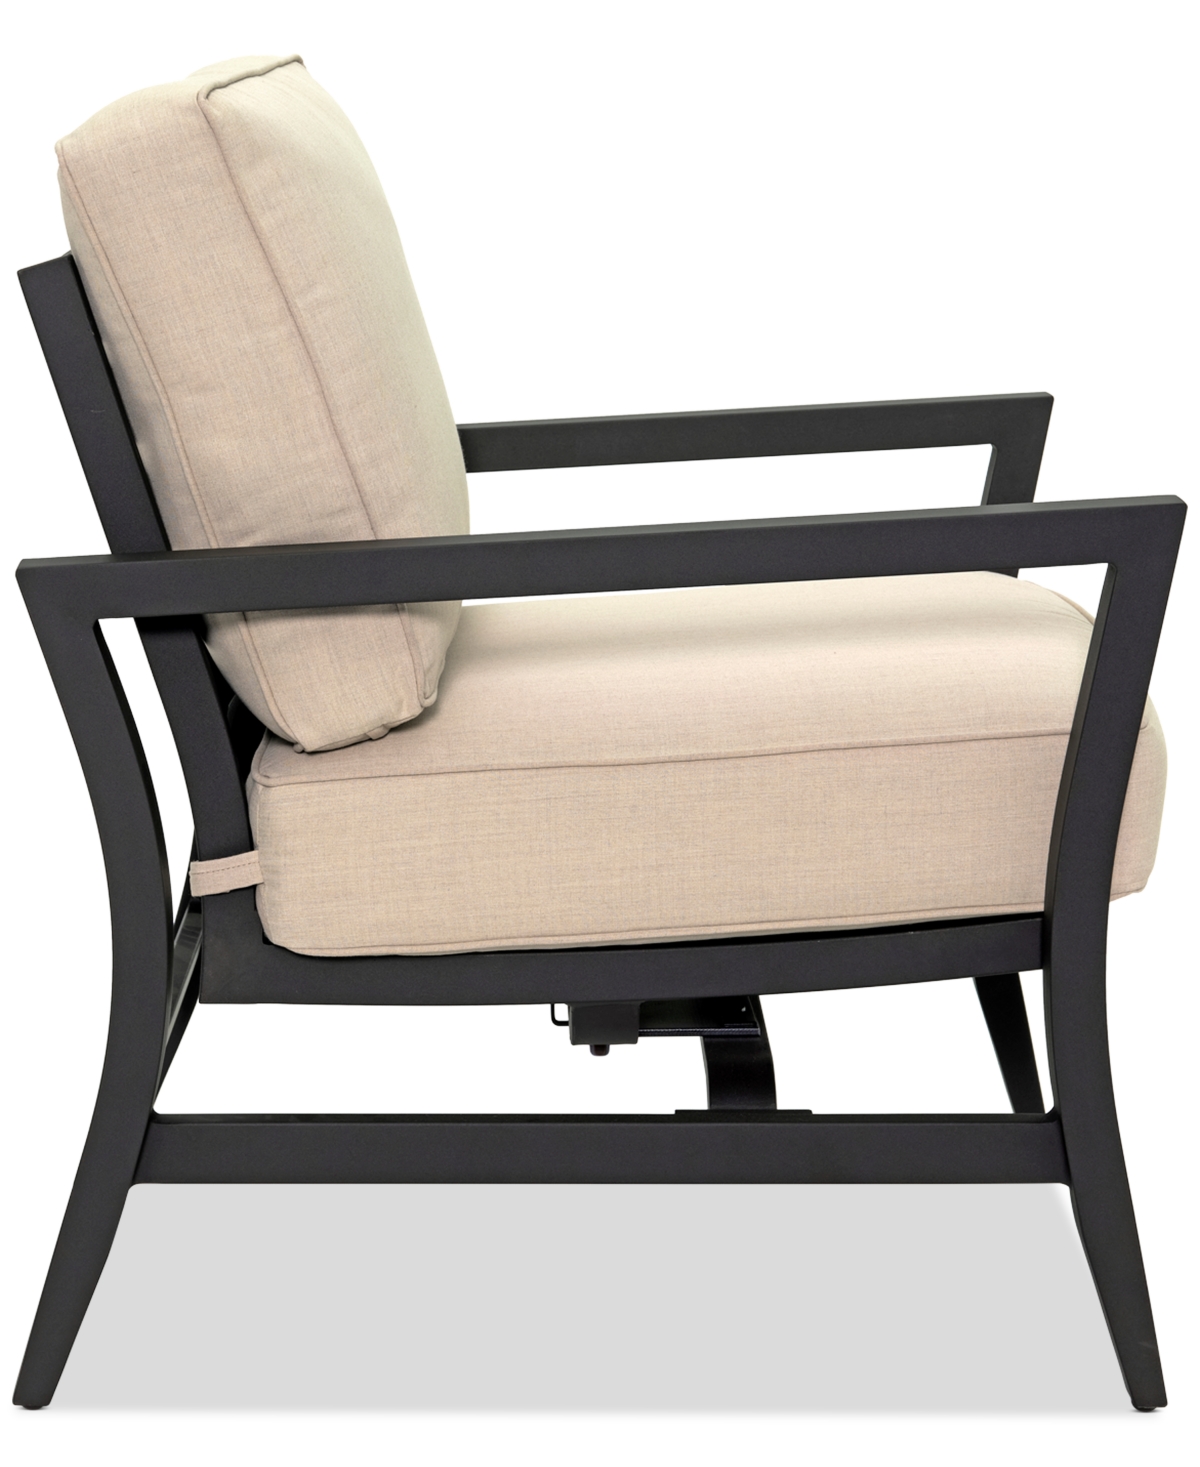 Agio Astaire Outdoor Rocker Club Chair, Created For Macy's In Solartex Linen